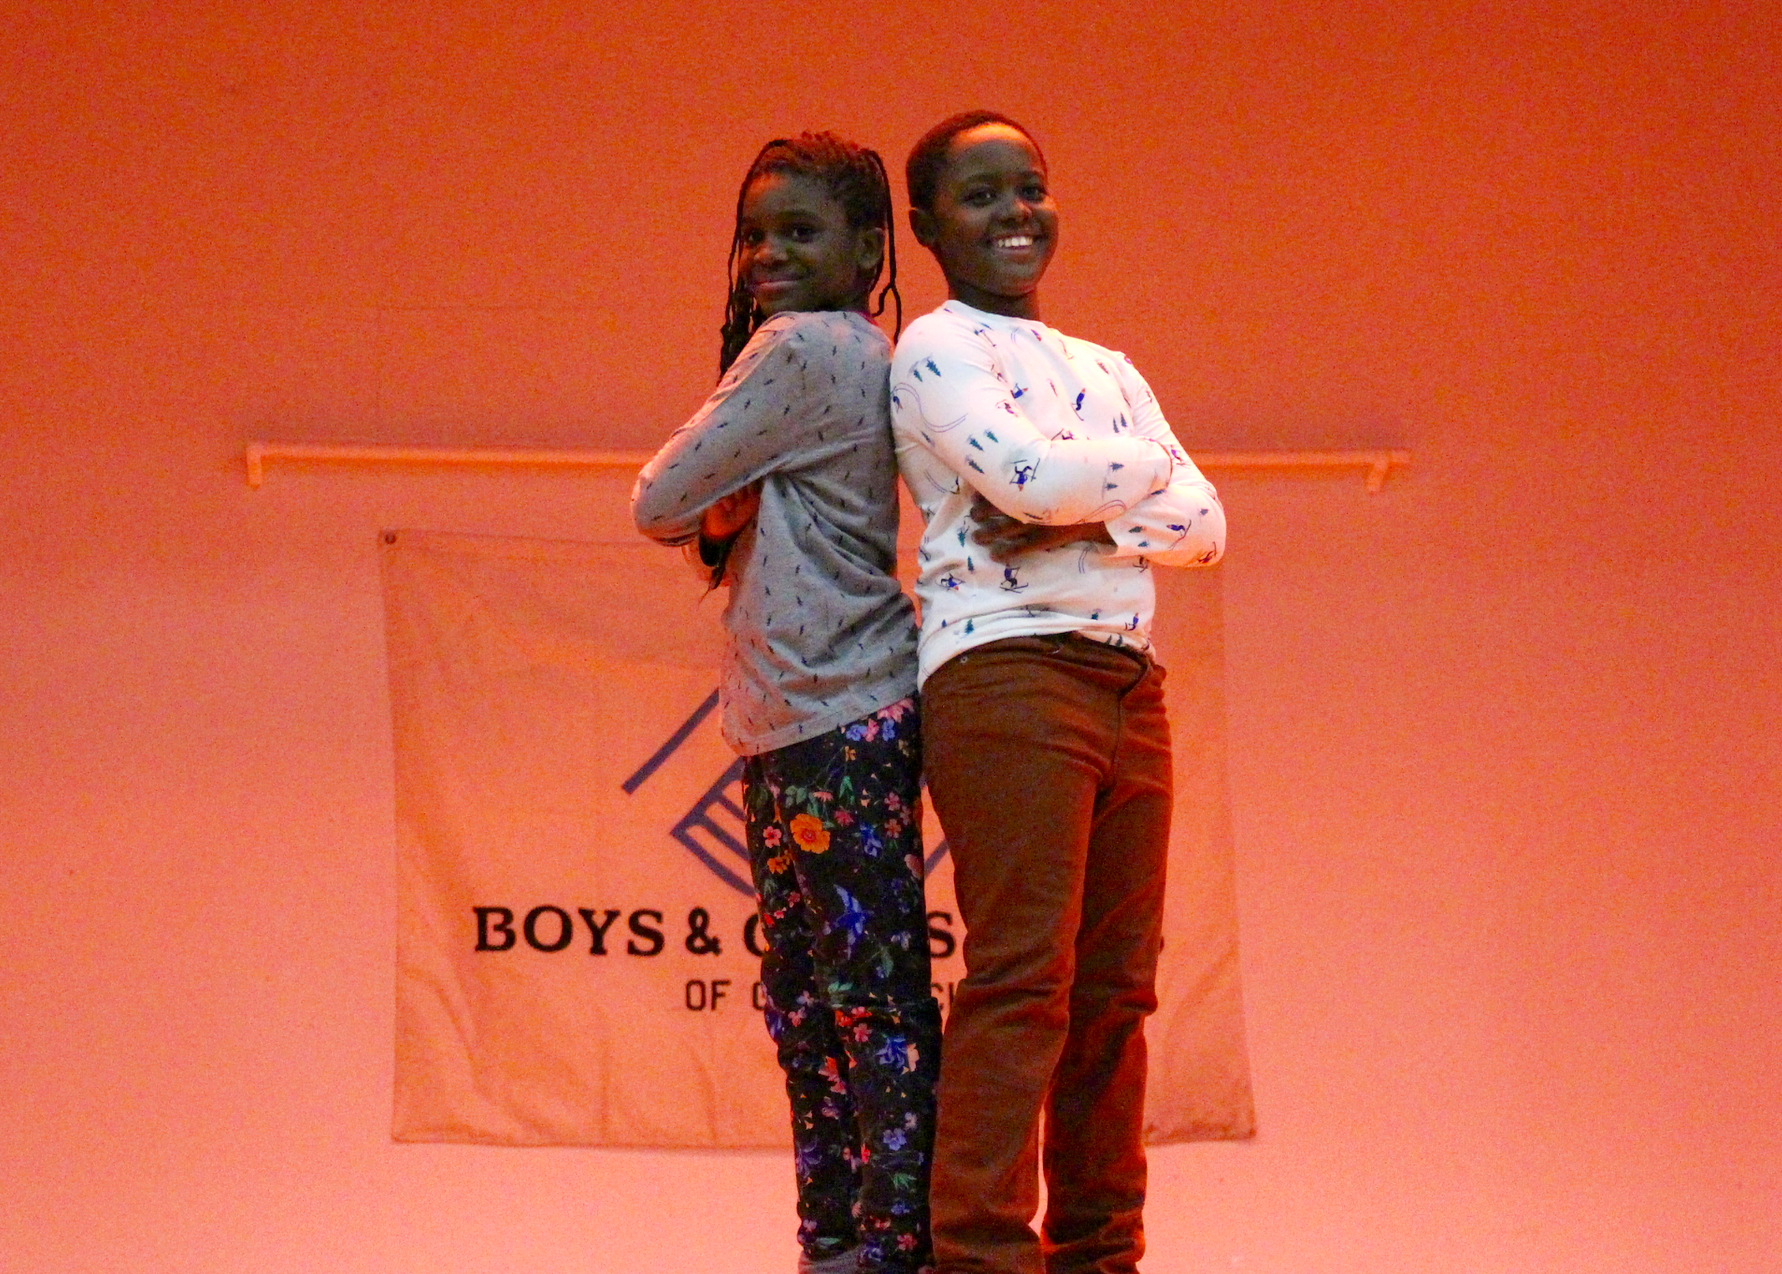 Boys & Girls Club of Greenwich members react to learning they could keep all the Old Navy outfits they modeled on Friday Jan 26, 2018 Photo: Leslie Yager